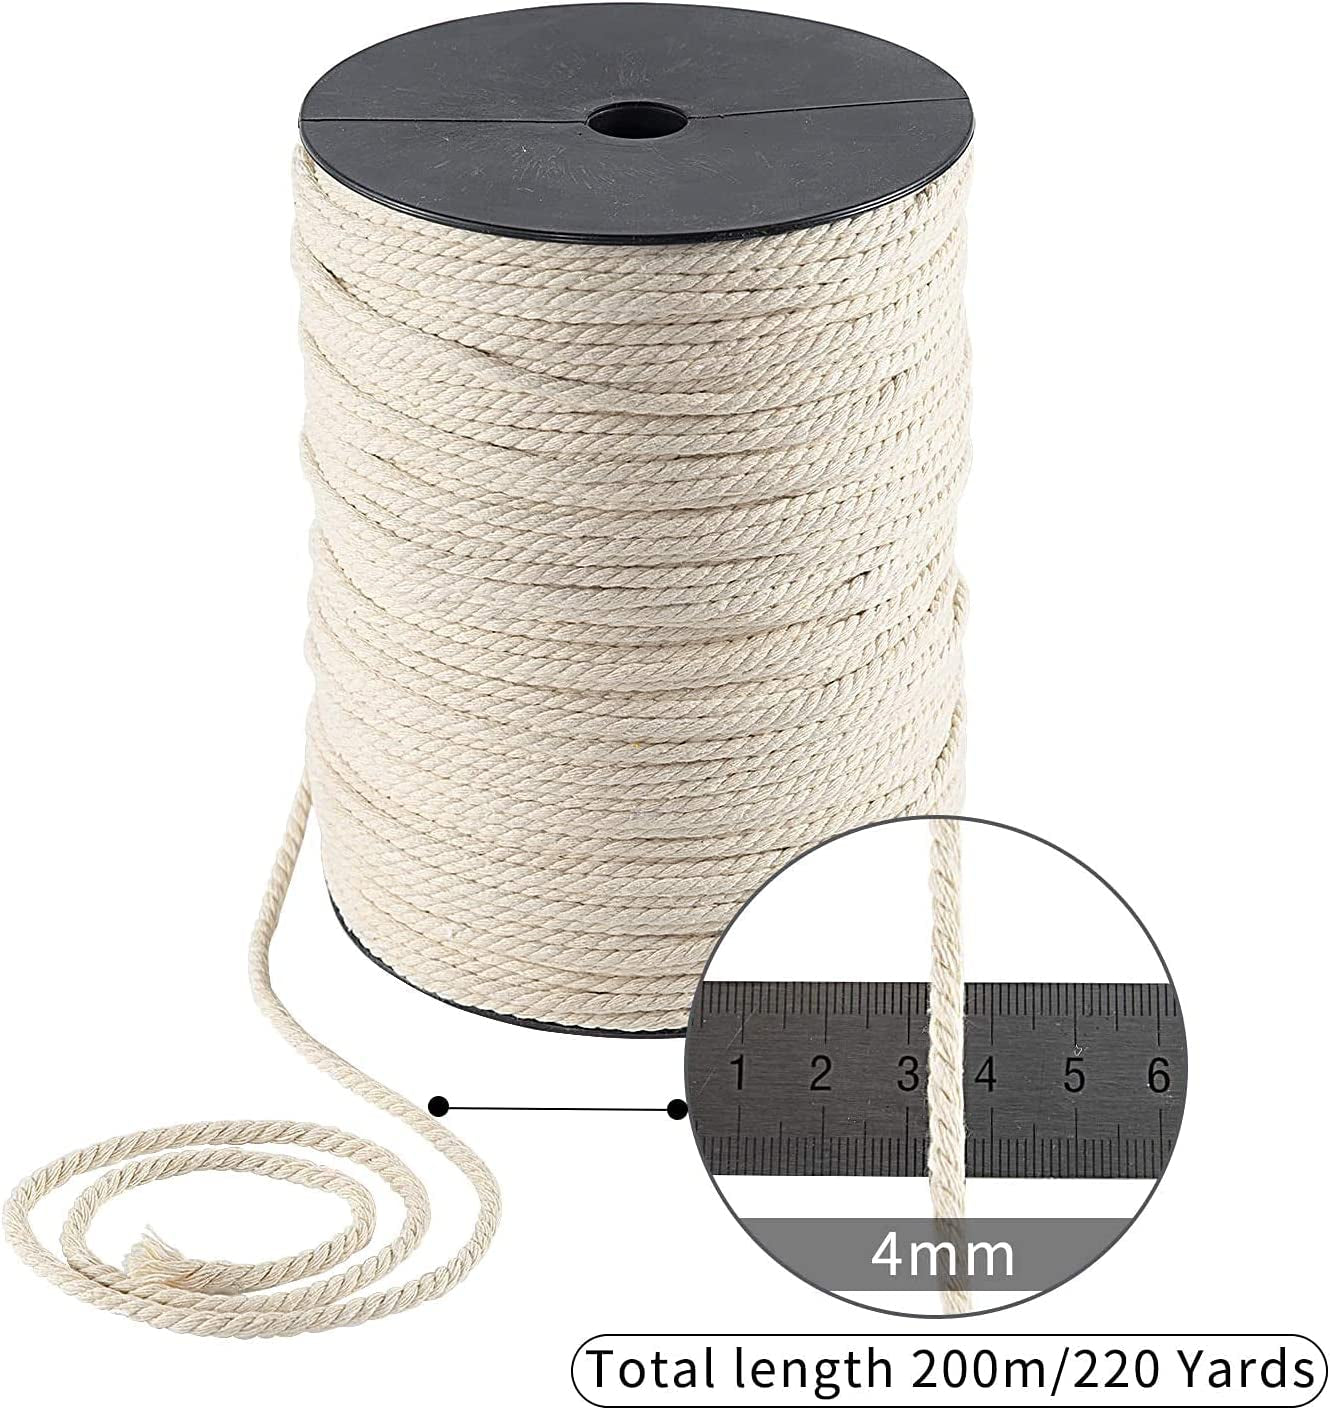 CNZON, Macrame Cord 4Mm Thick Cotton Twine 656 Feet, Natural Cotton Macrame Rope Cotton Cord for Wall Hanging, Plant Hangers, Crafts, Knitting,Home Decoration